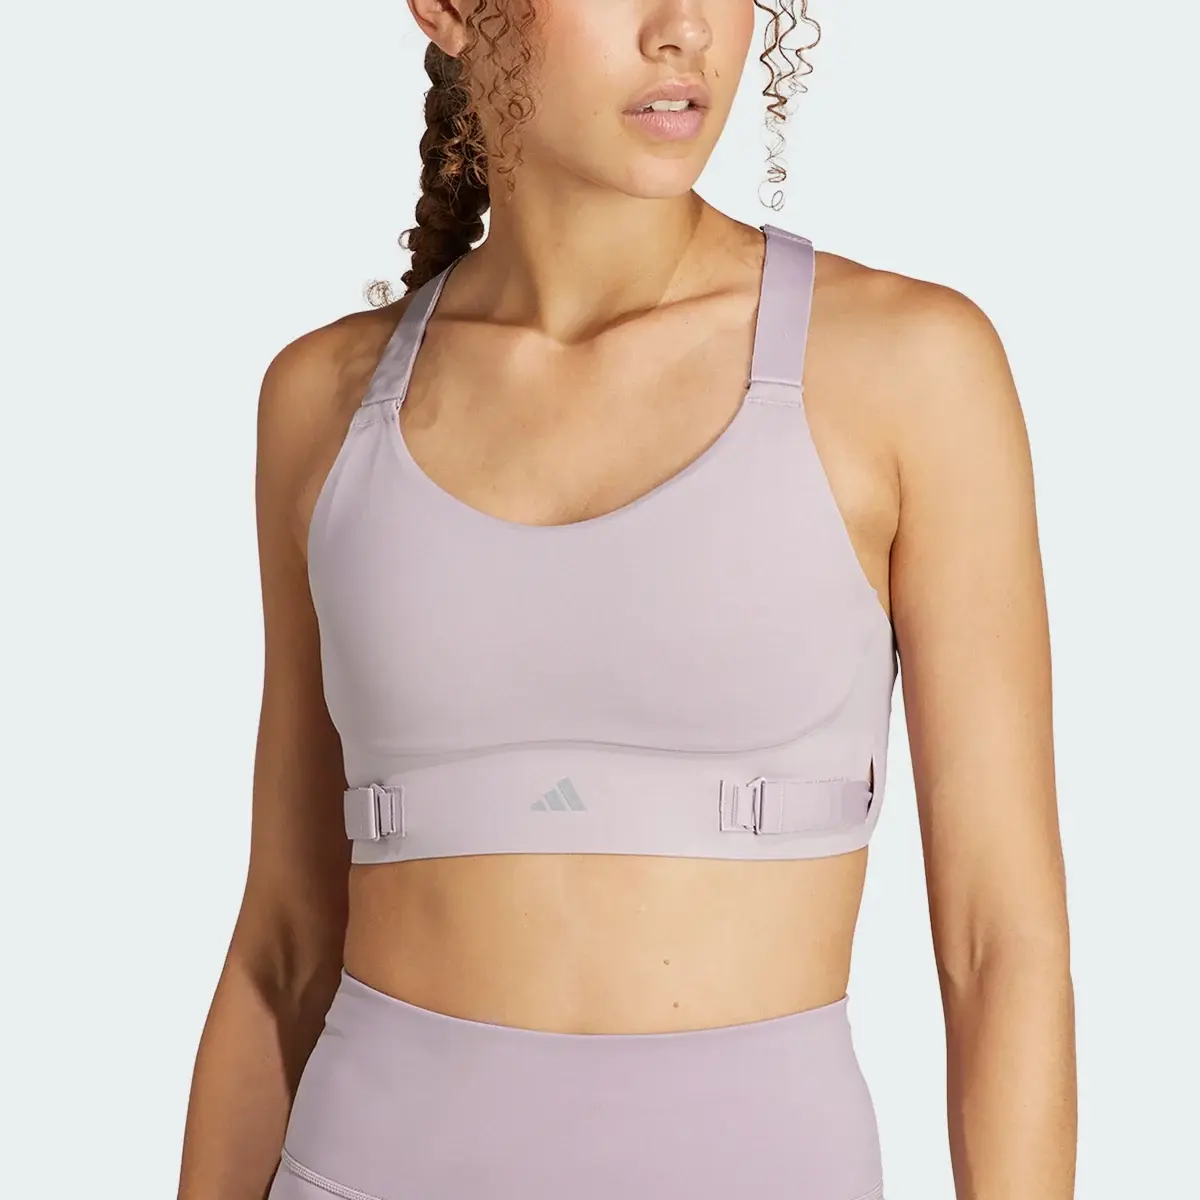 Adidas Brassière FastImpact Luxe Run Maintien fort. 1